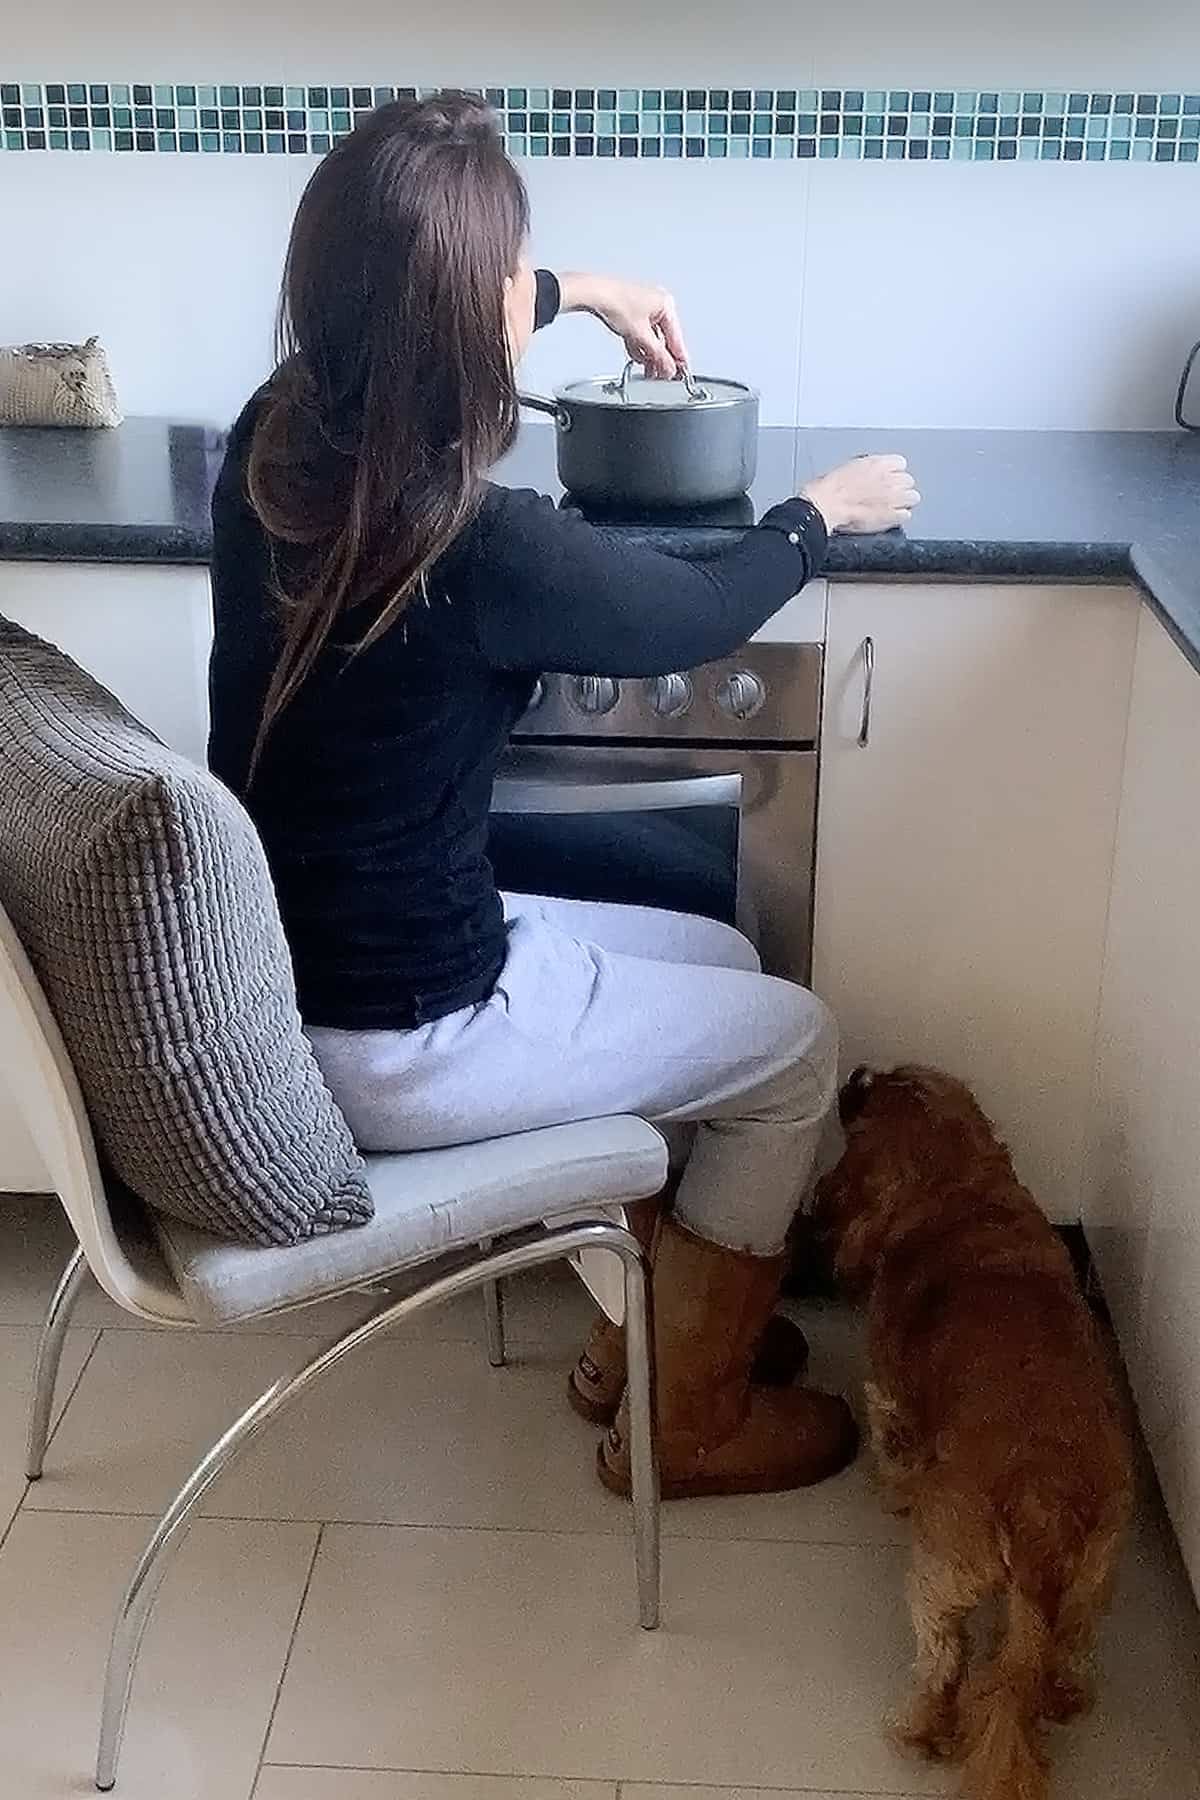 Ayeh sitting on a chair whilst cooking in the kitchen